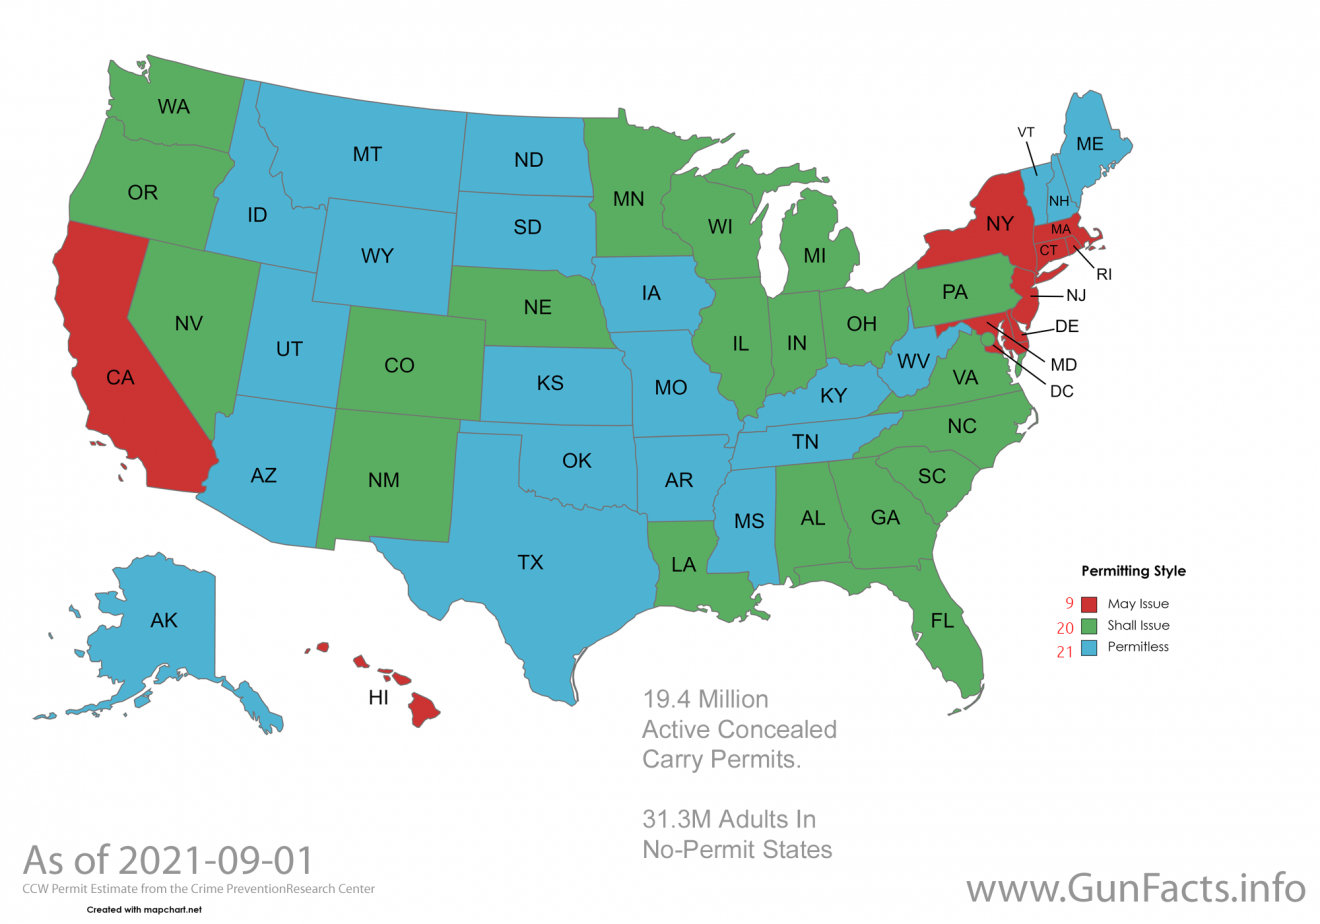 Map of U.S. states by concealed carry permitting regime